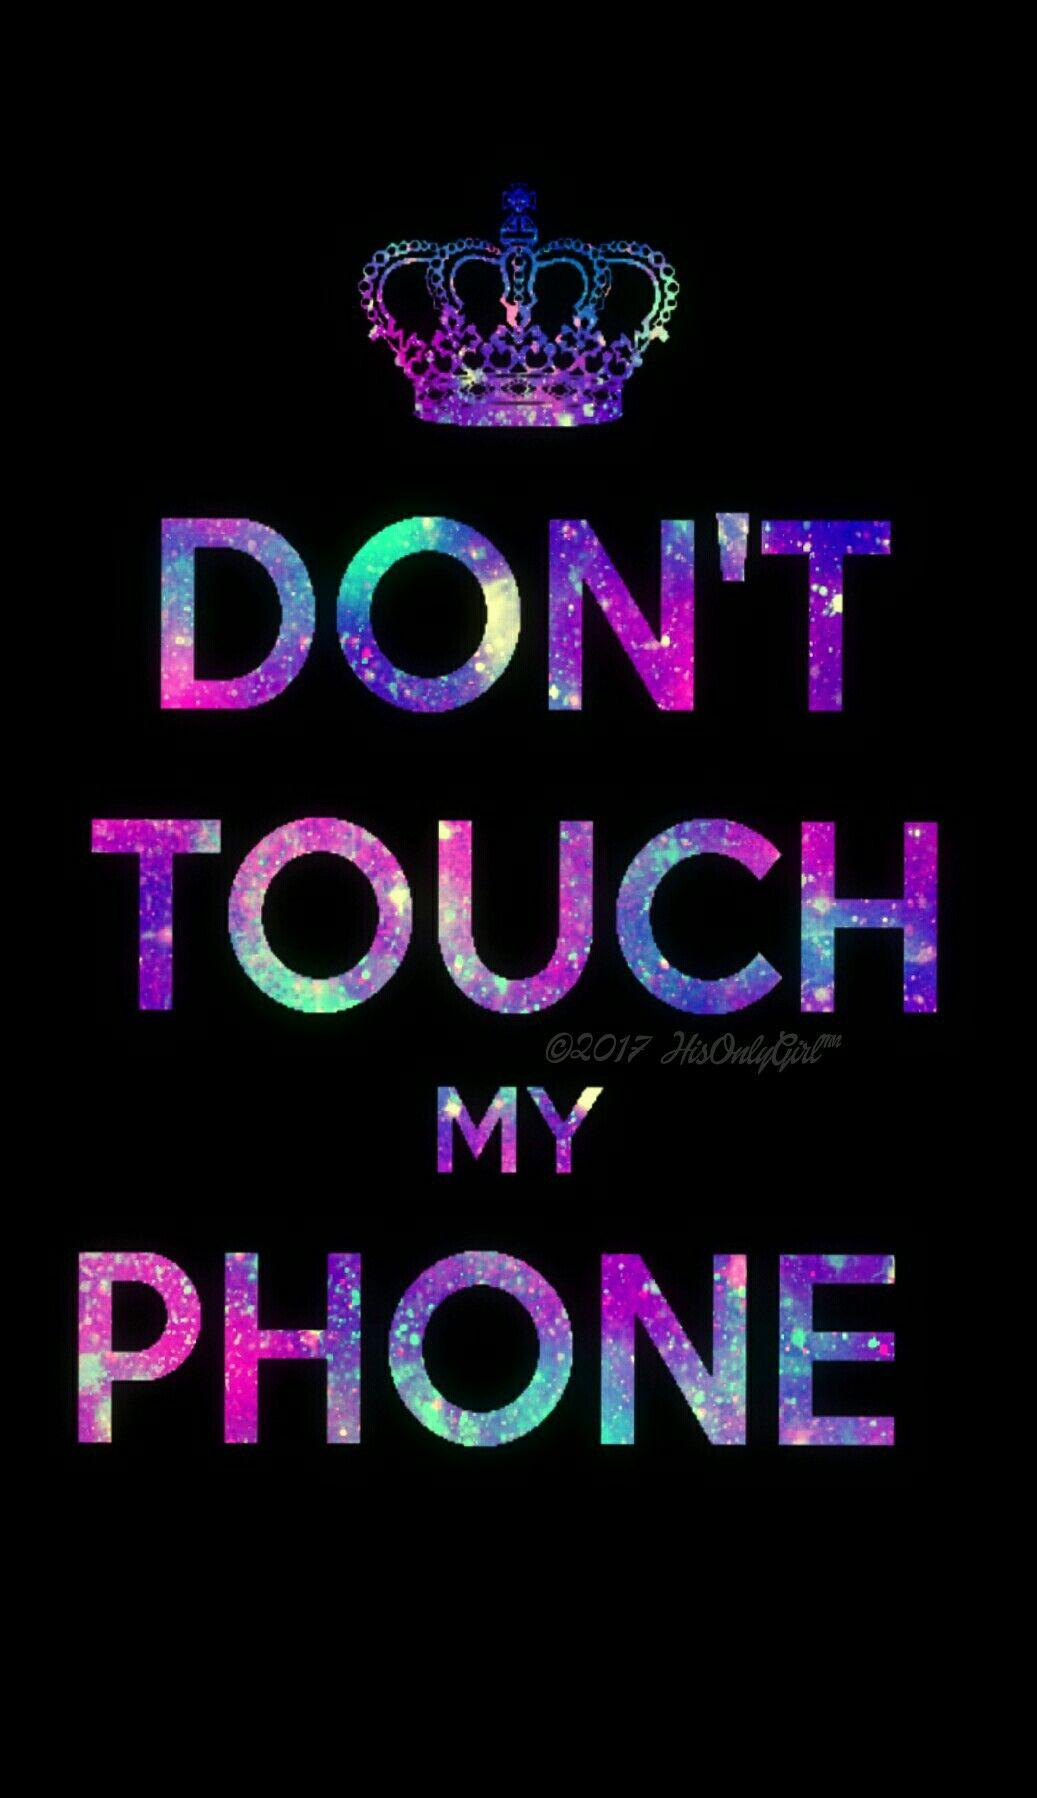 Don't touch galaxy wallpaper I created for the app CocoPPa